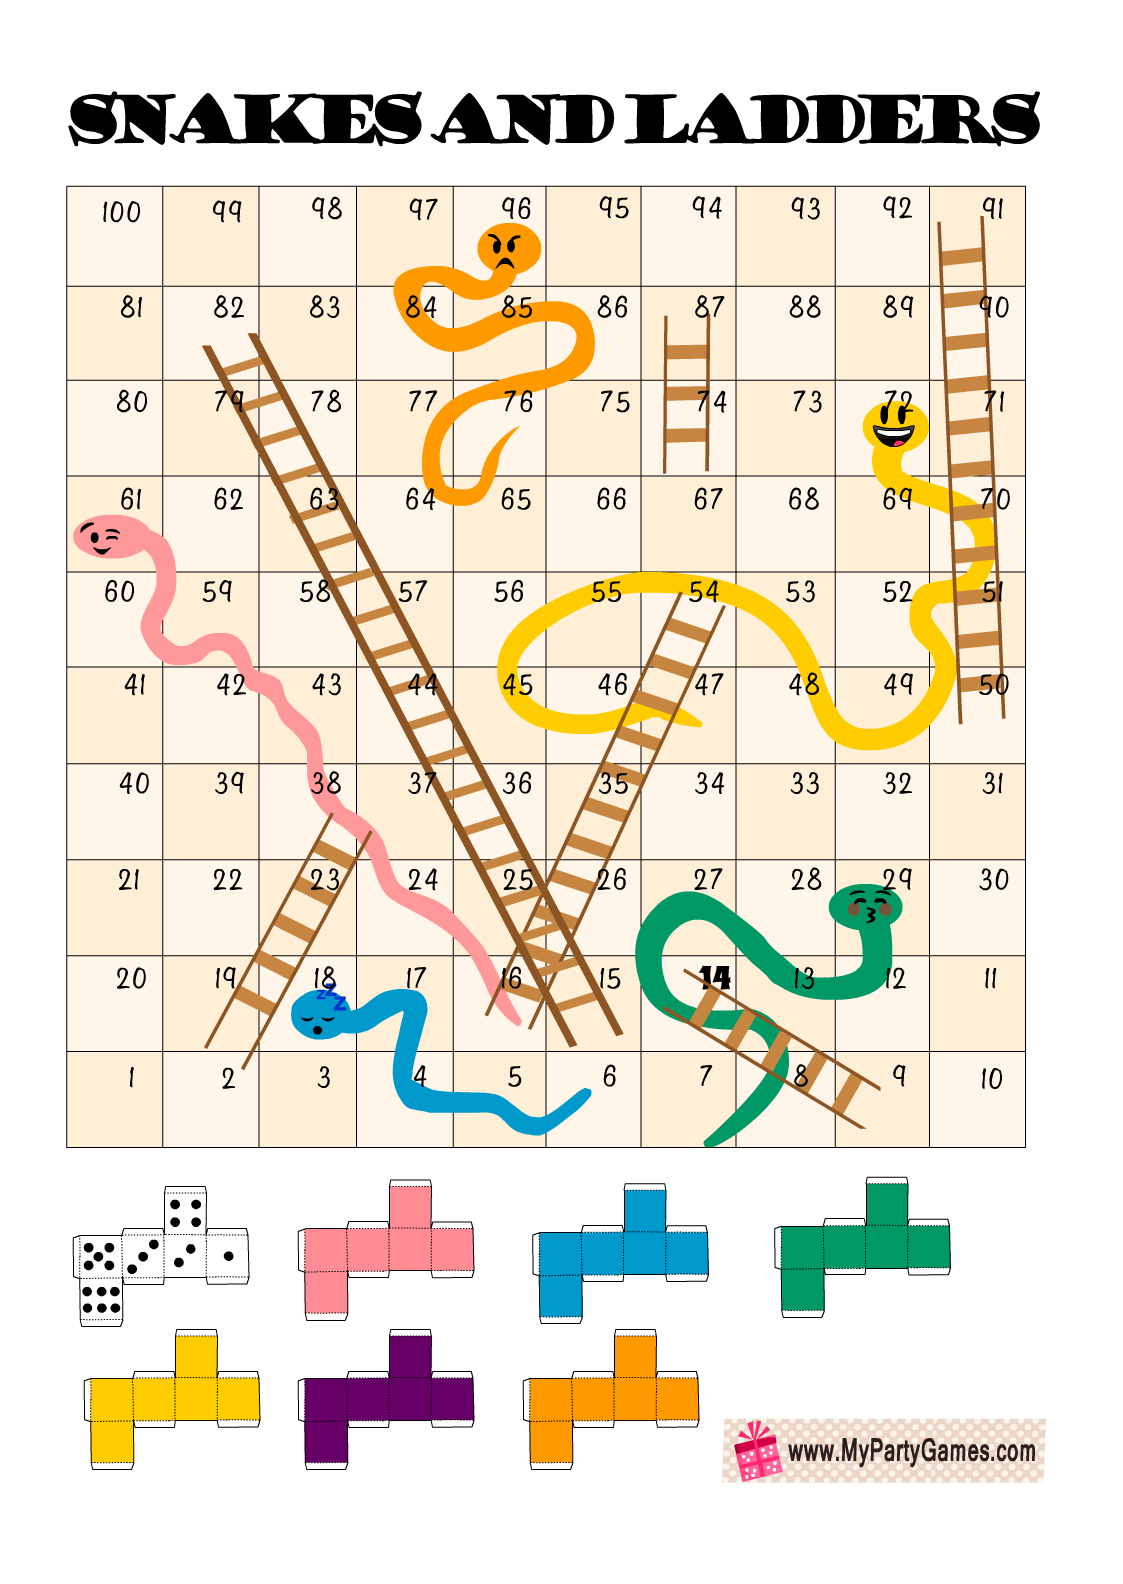 Snakes and ladders board game free printables